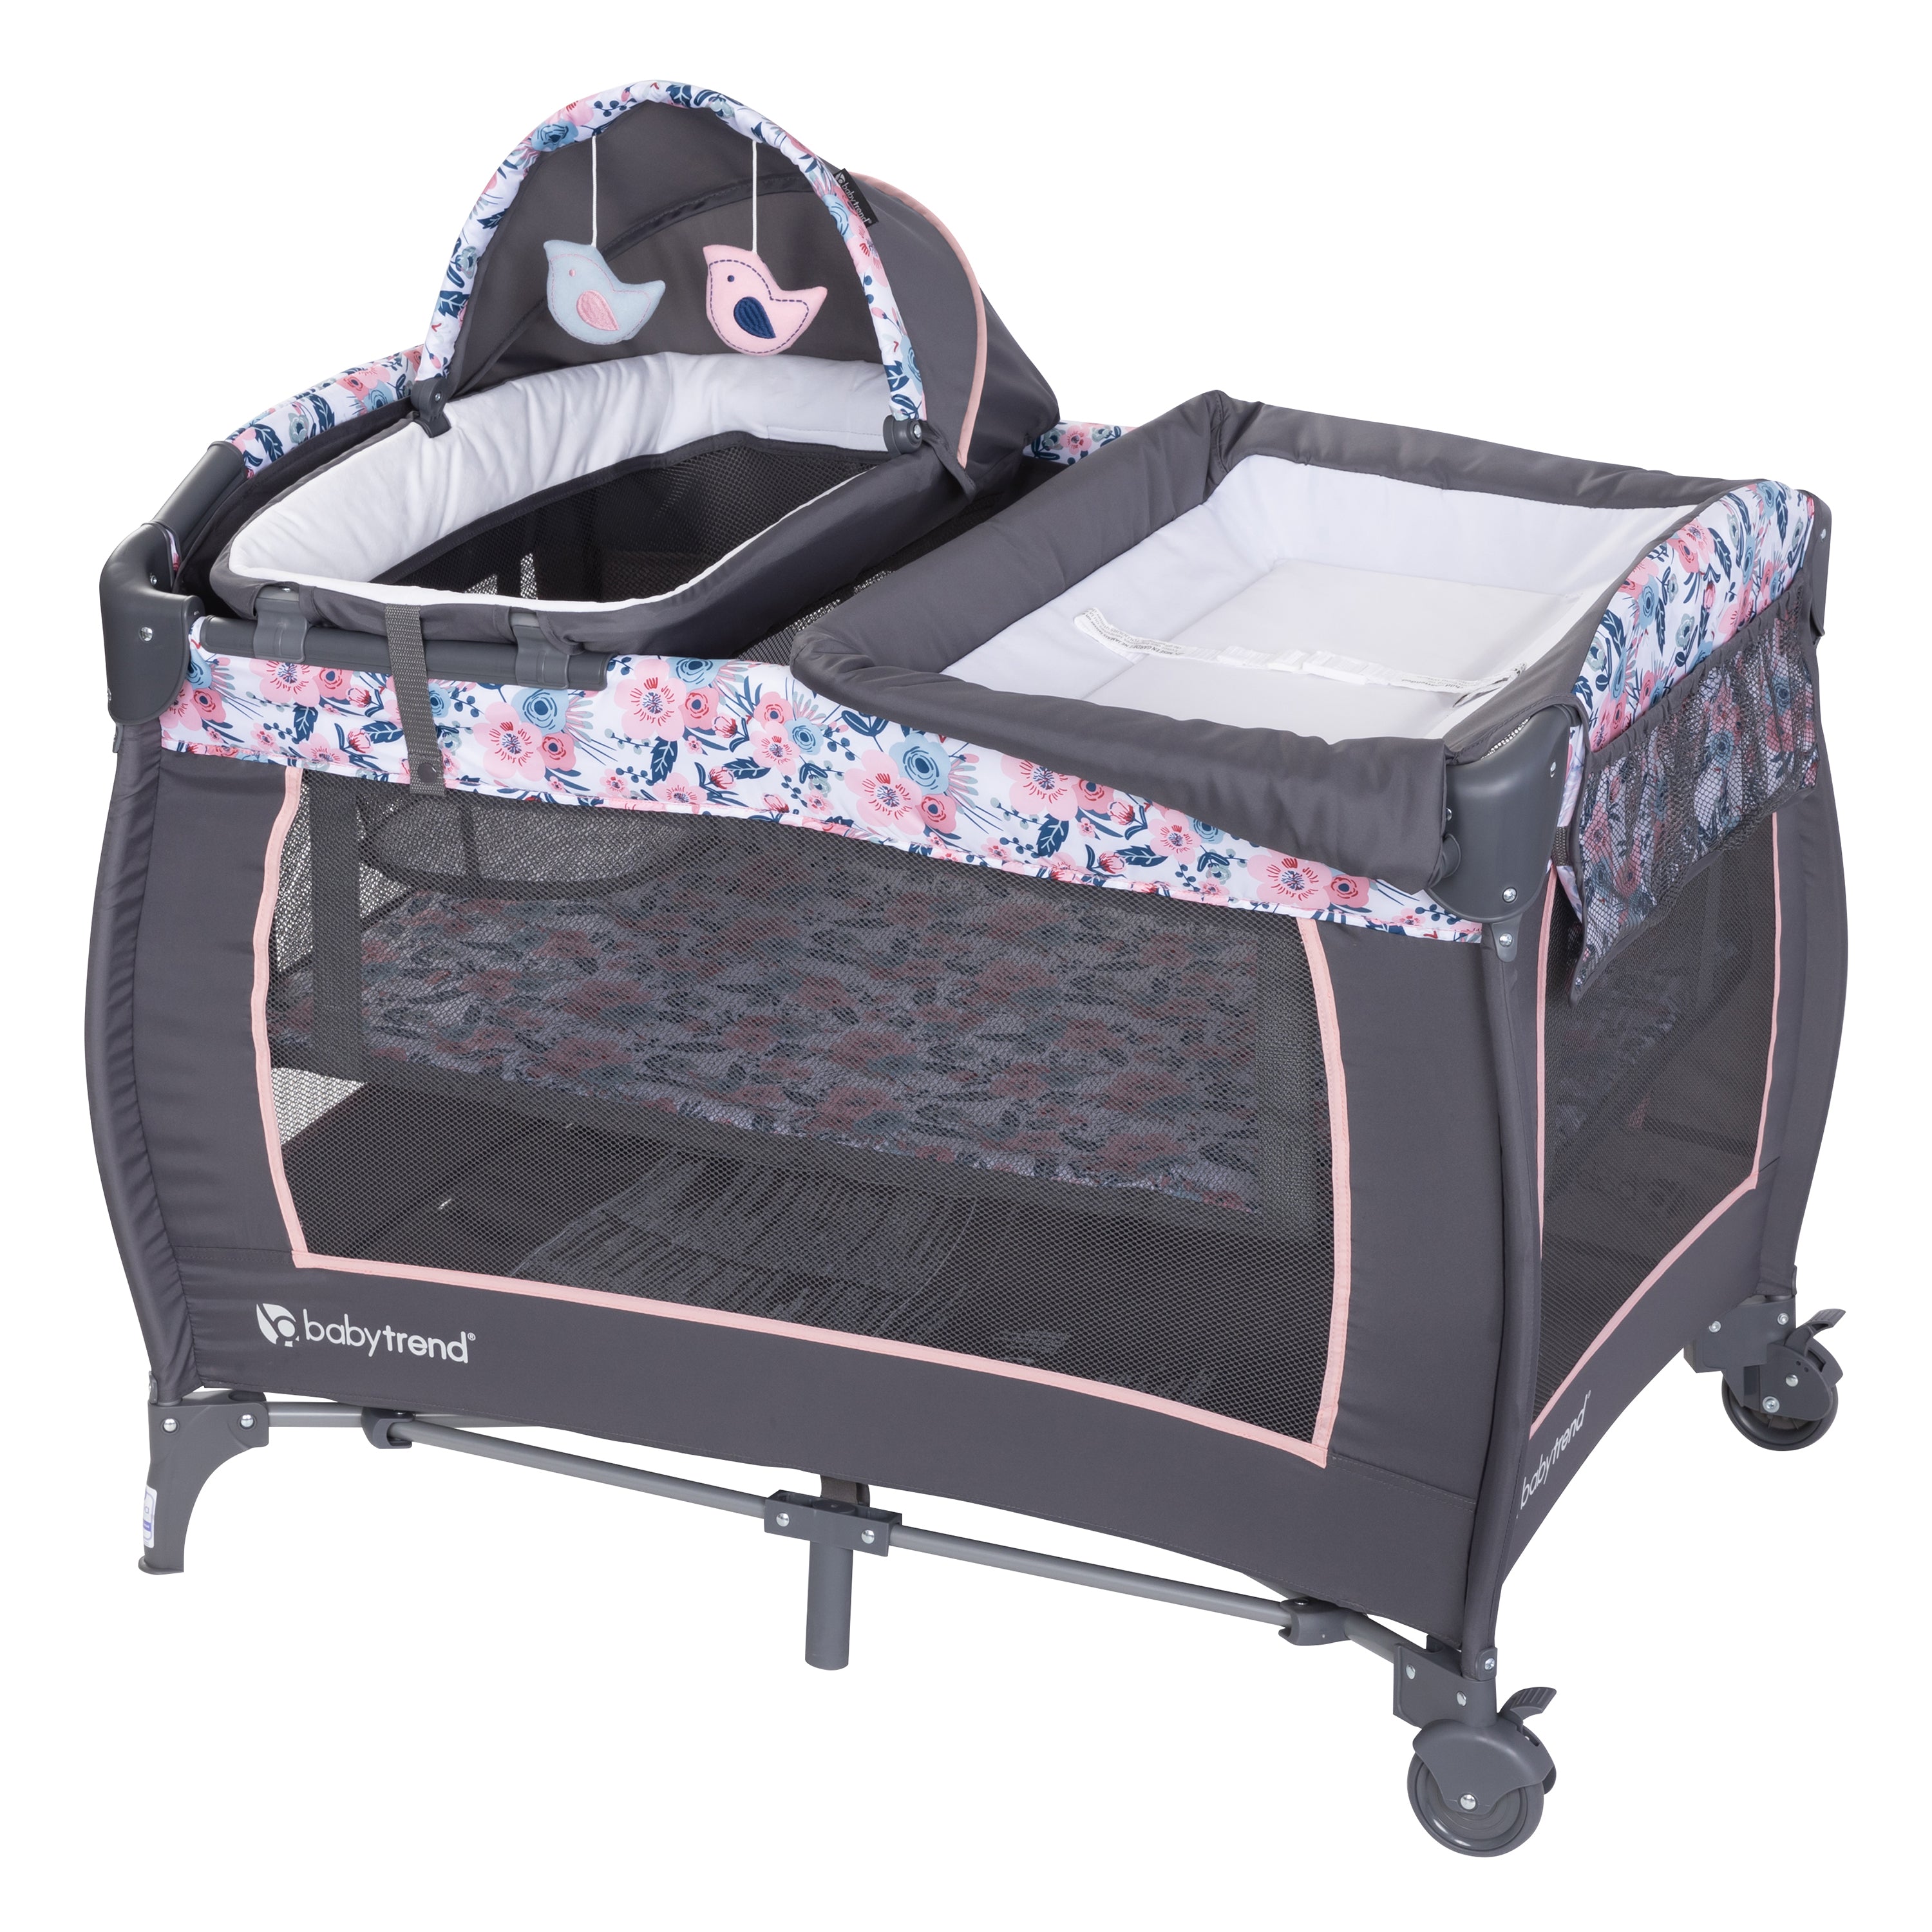 Lil' Snooze™ Deluxe II Nursery Center Playard - Bluebell (Target Exclusive)